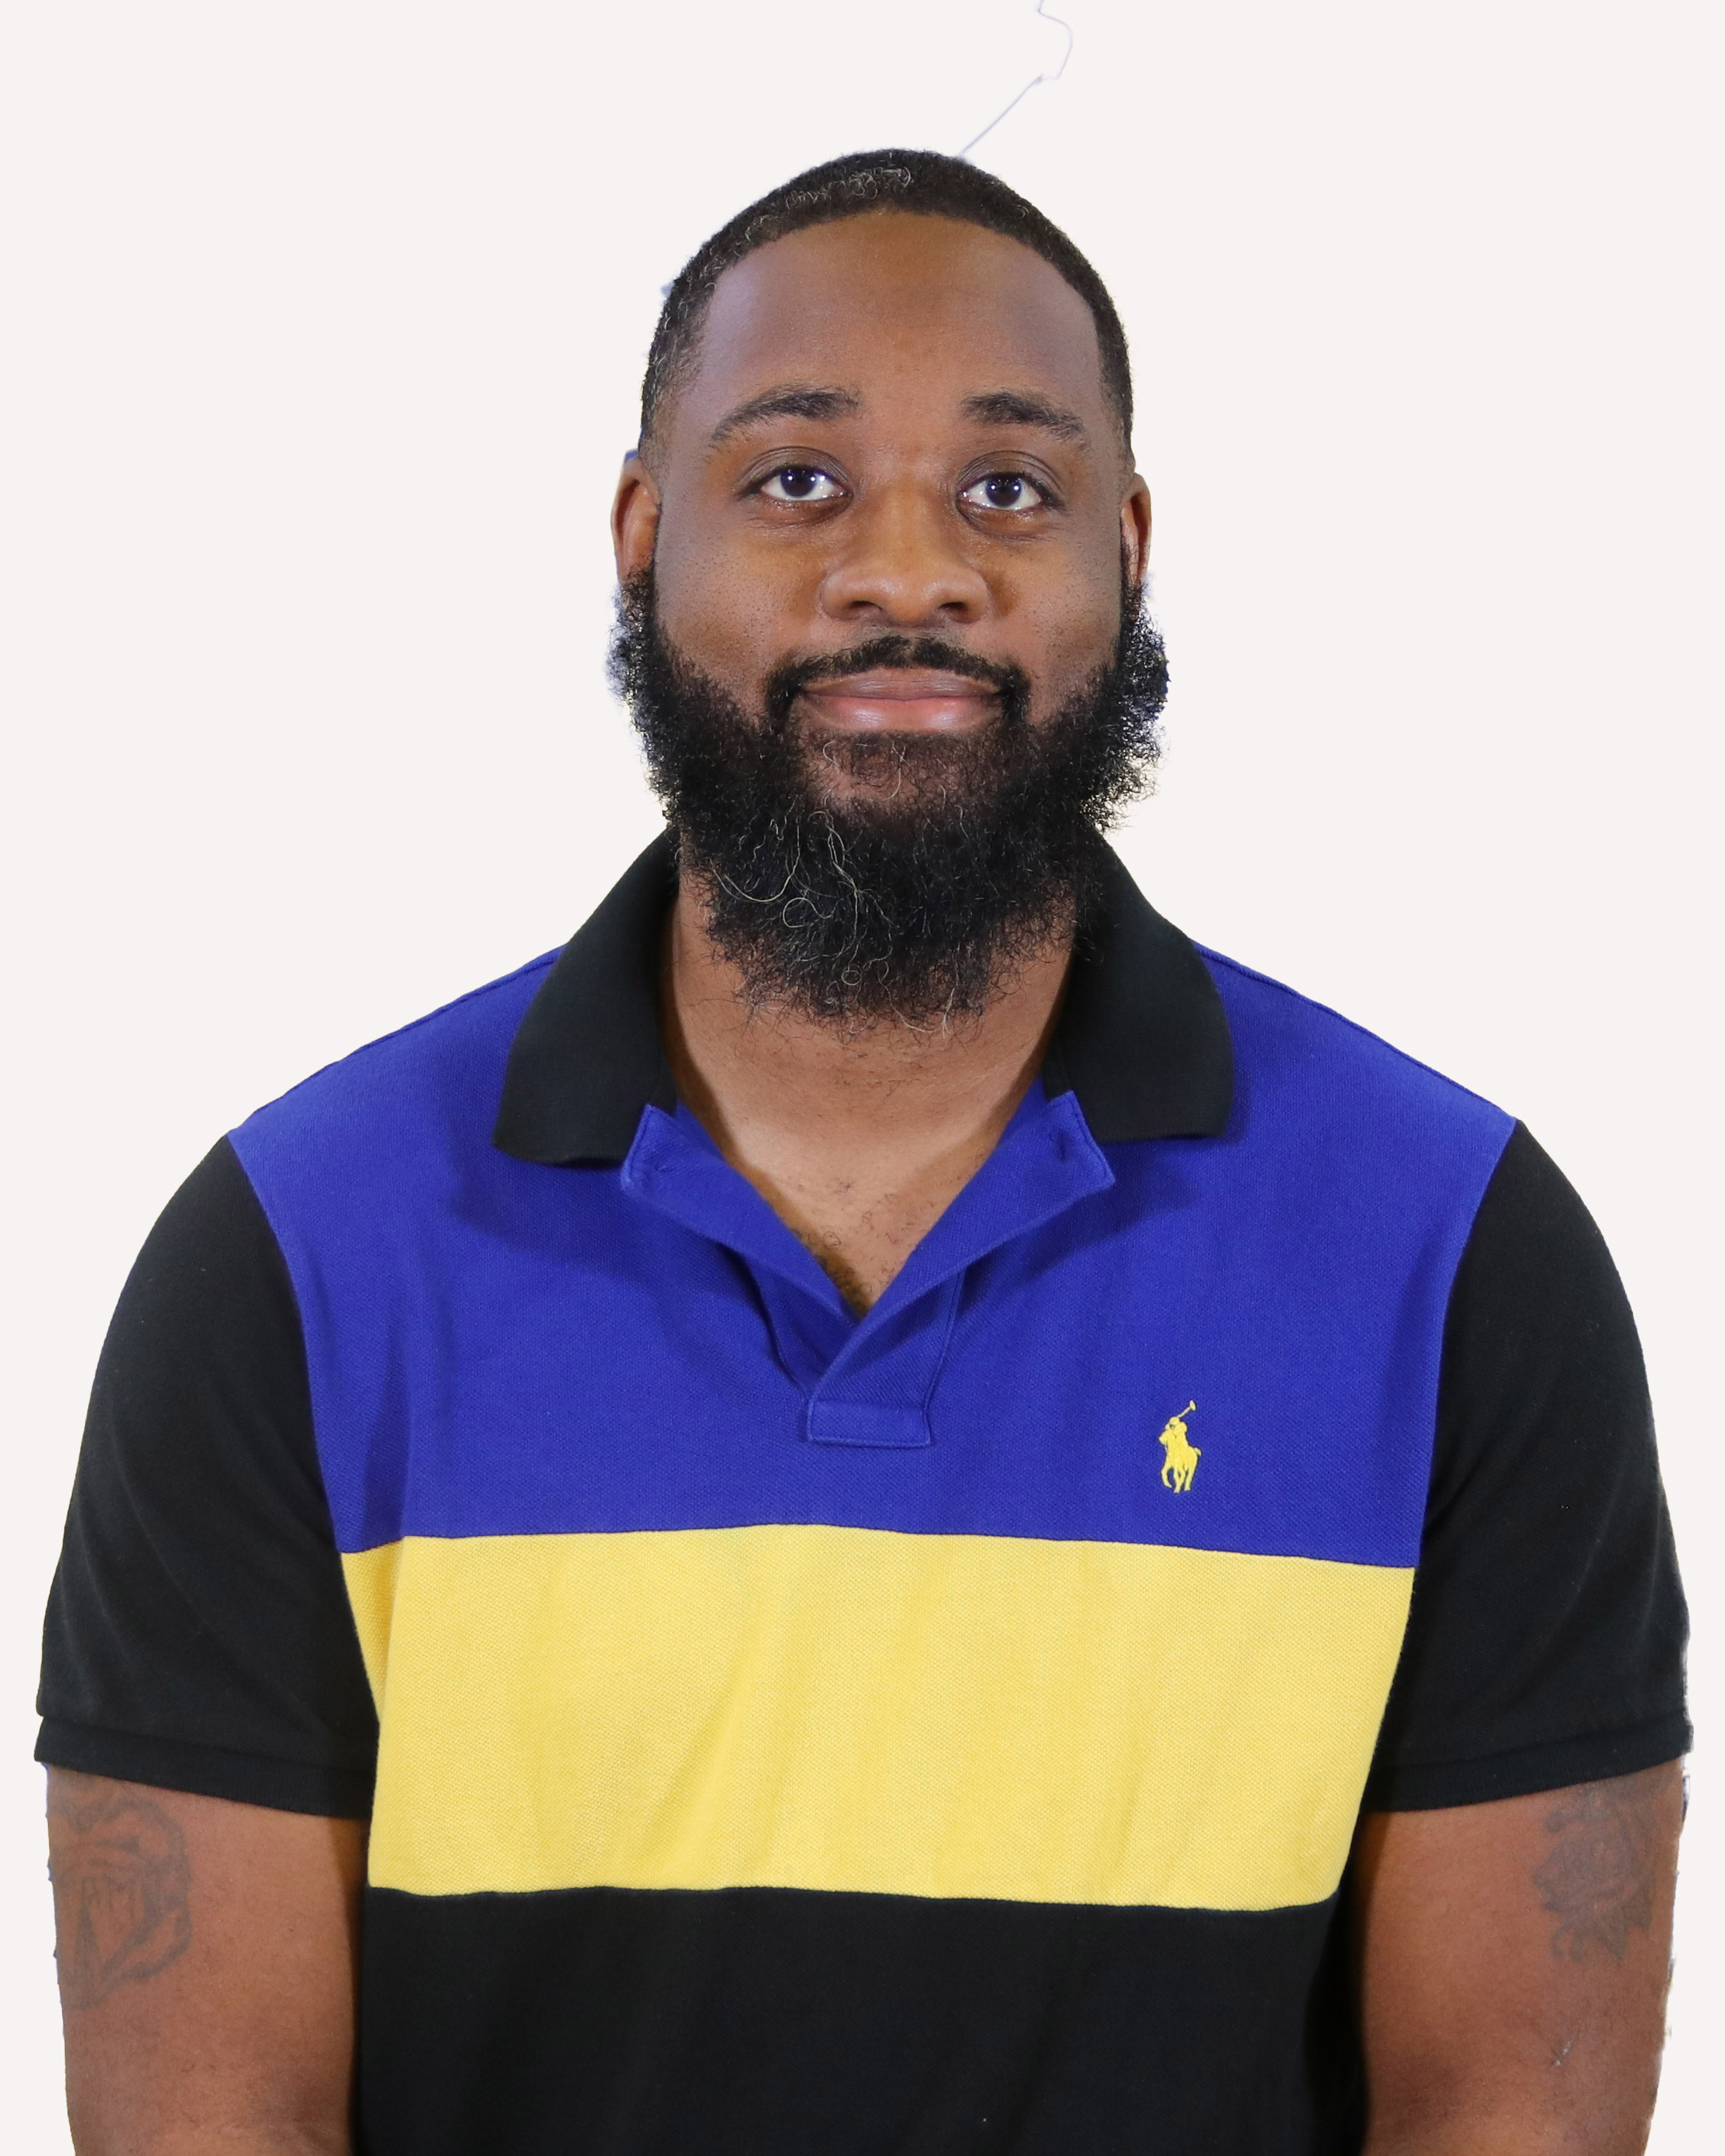 Man with beard wearing a striped polo